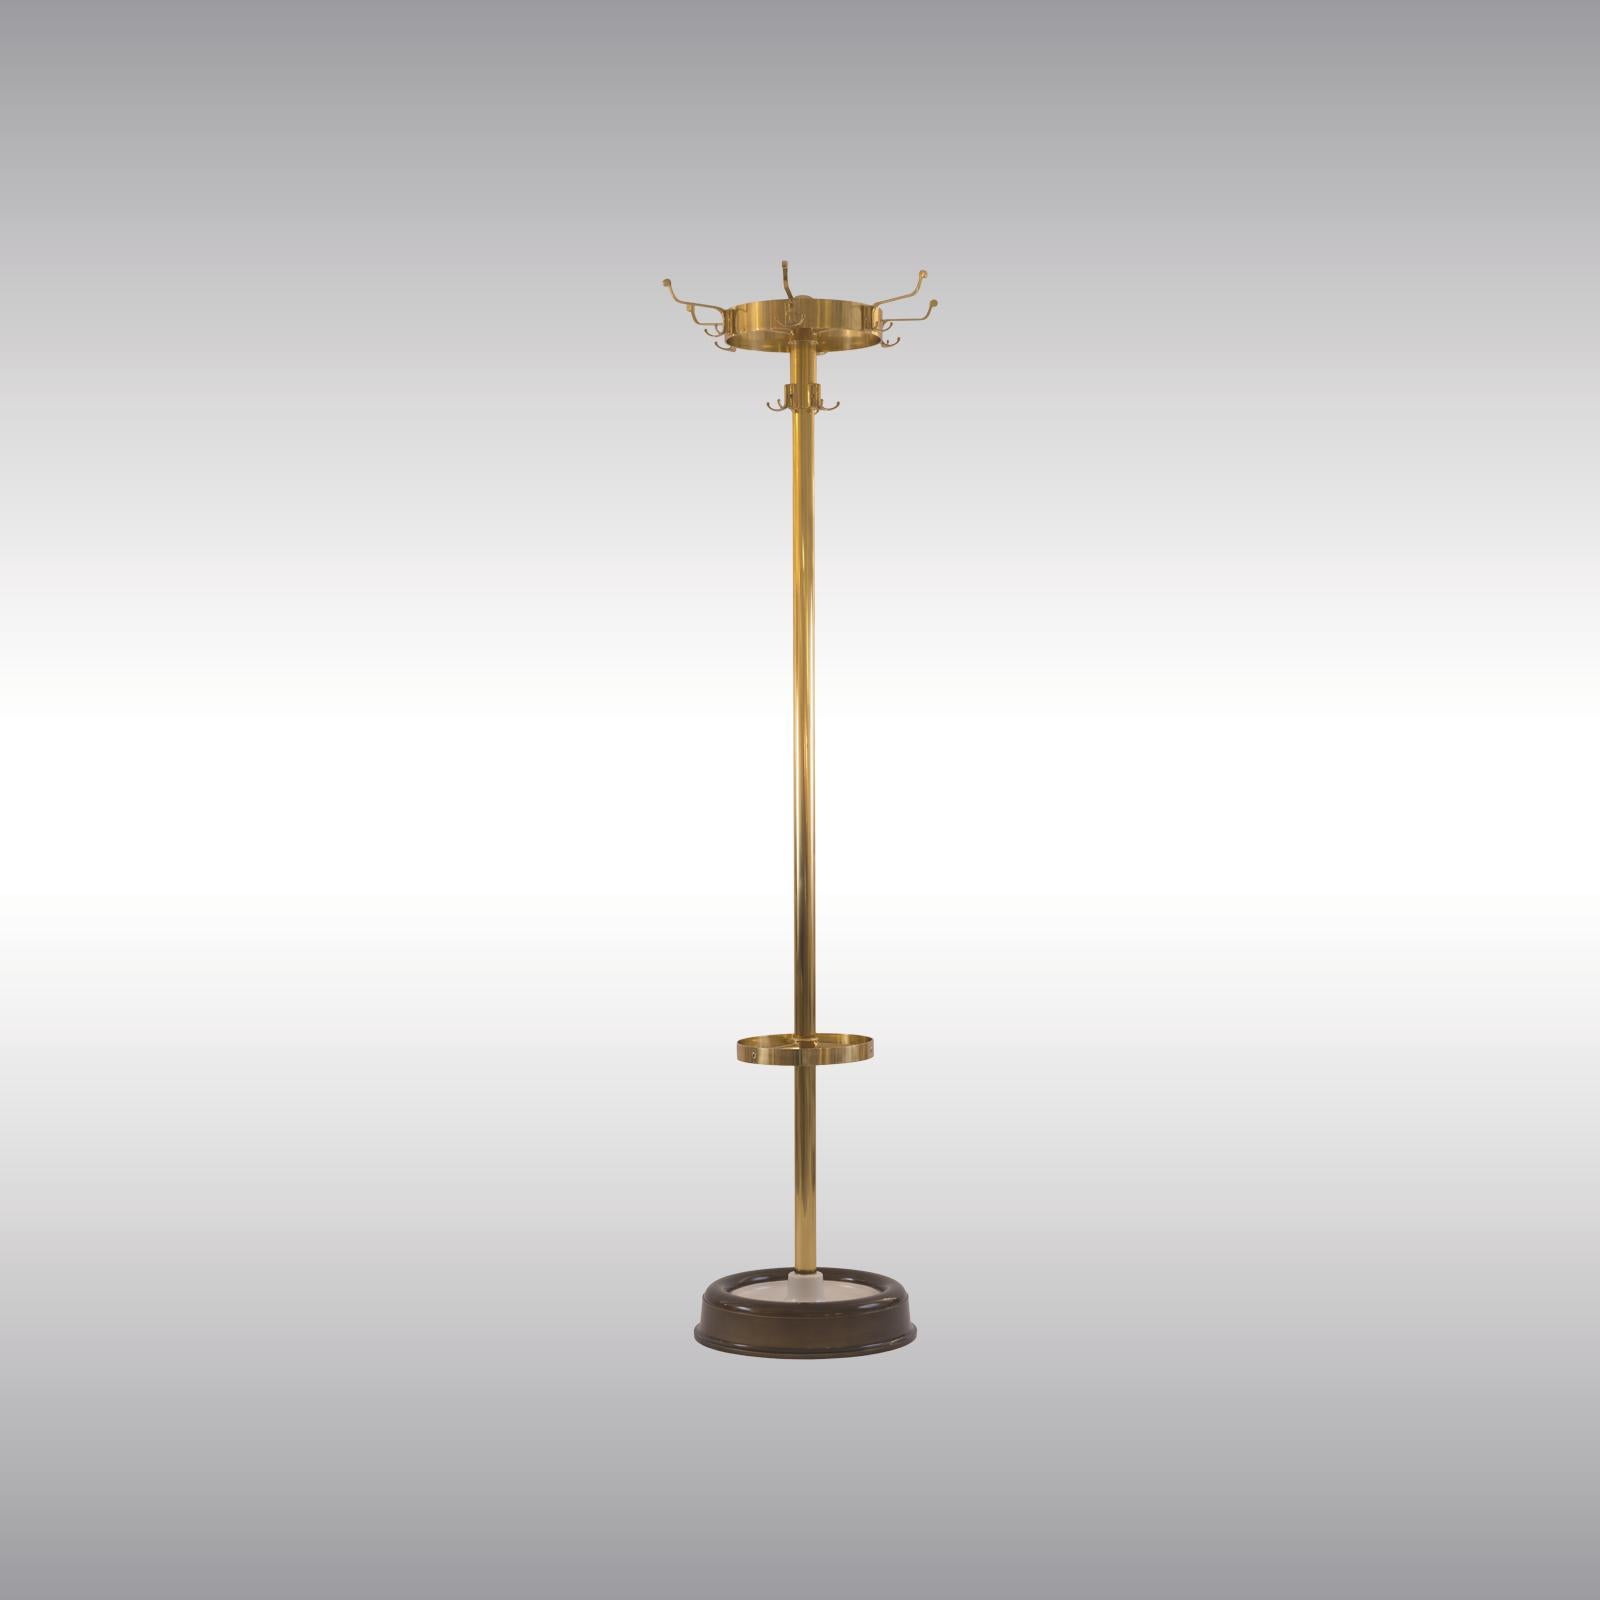 Very elegant Viennese Coatstand Pictured in a semigloss finish from the 50ies - re edition.

Different finishes available.